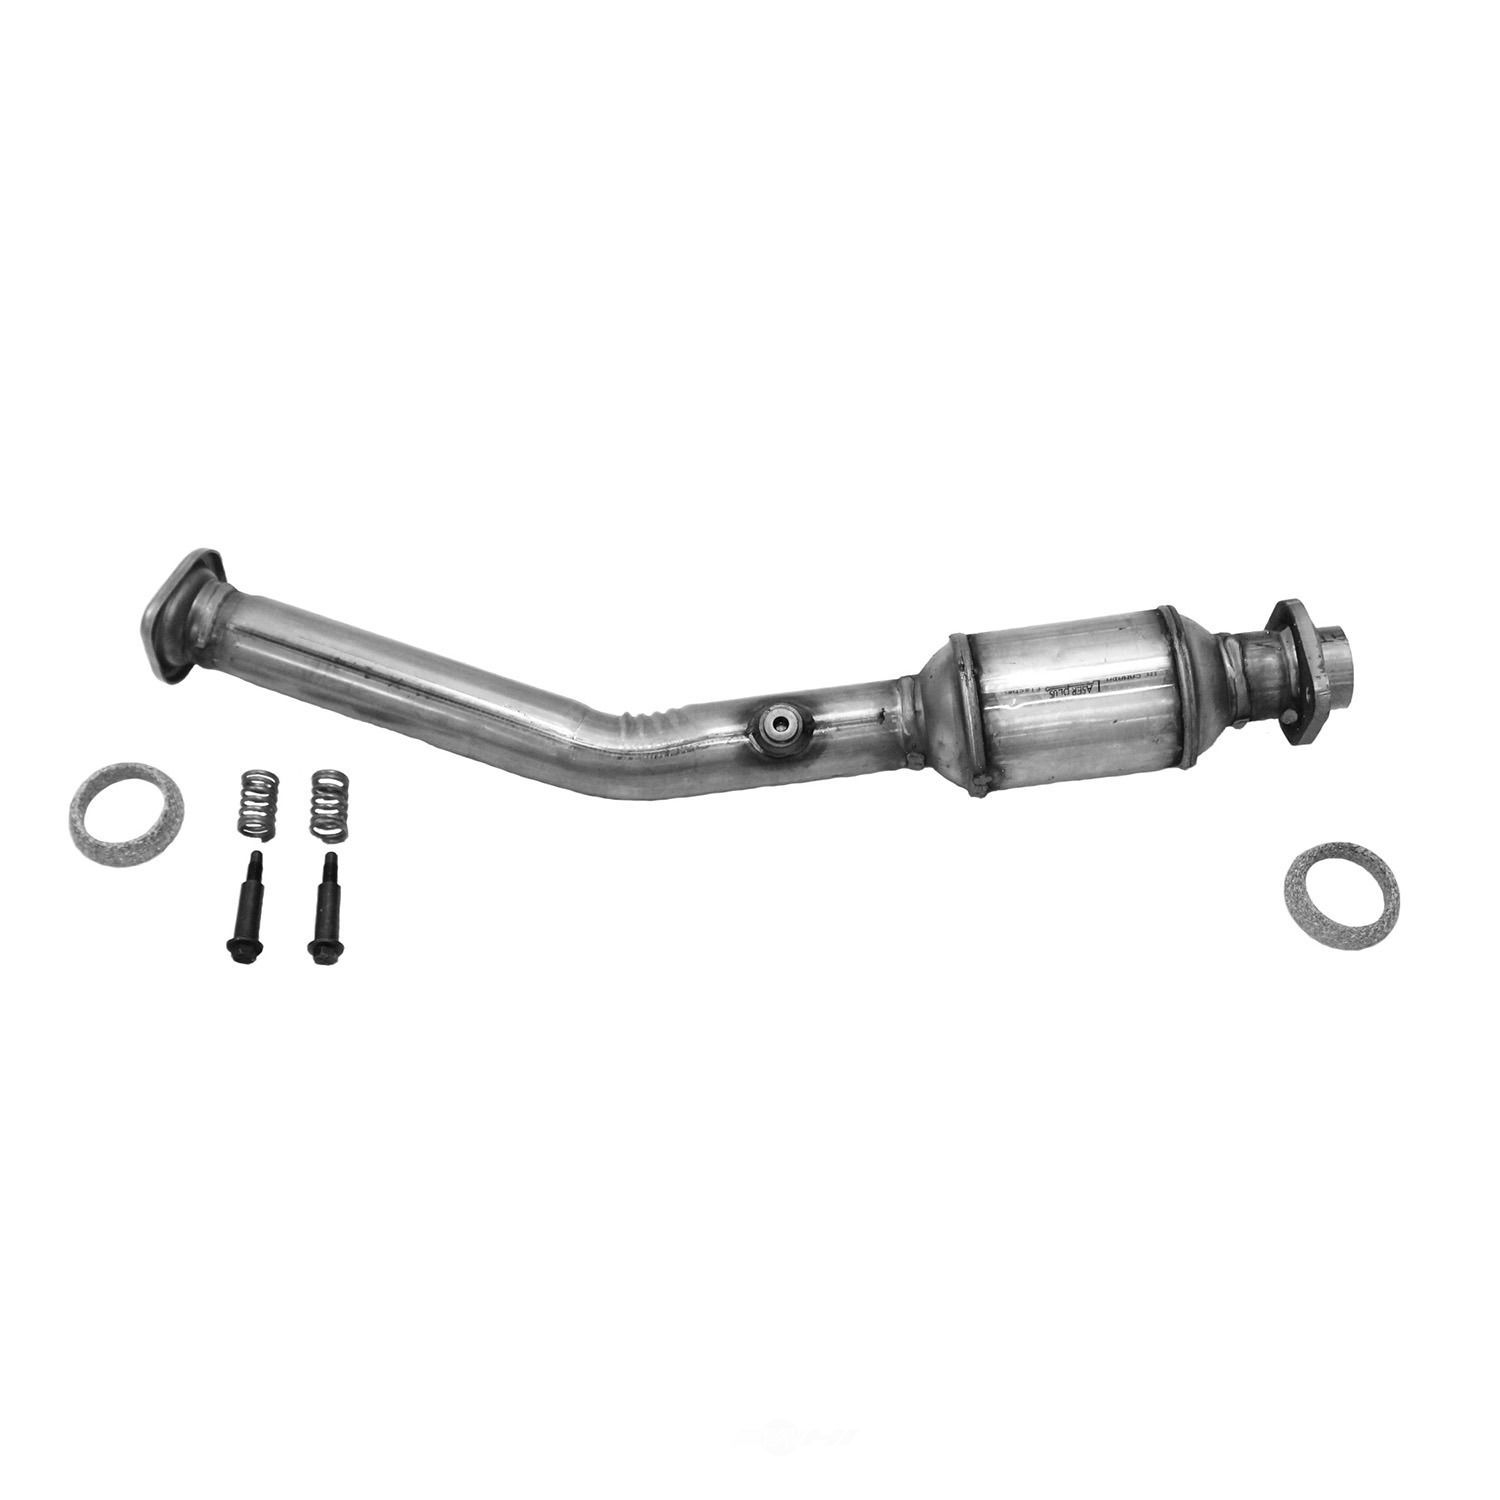 AP EXHAUST W/FEDERAL CONVERTER - Direct Fit Converter (Rear) - APF 642805